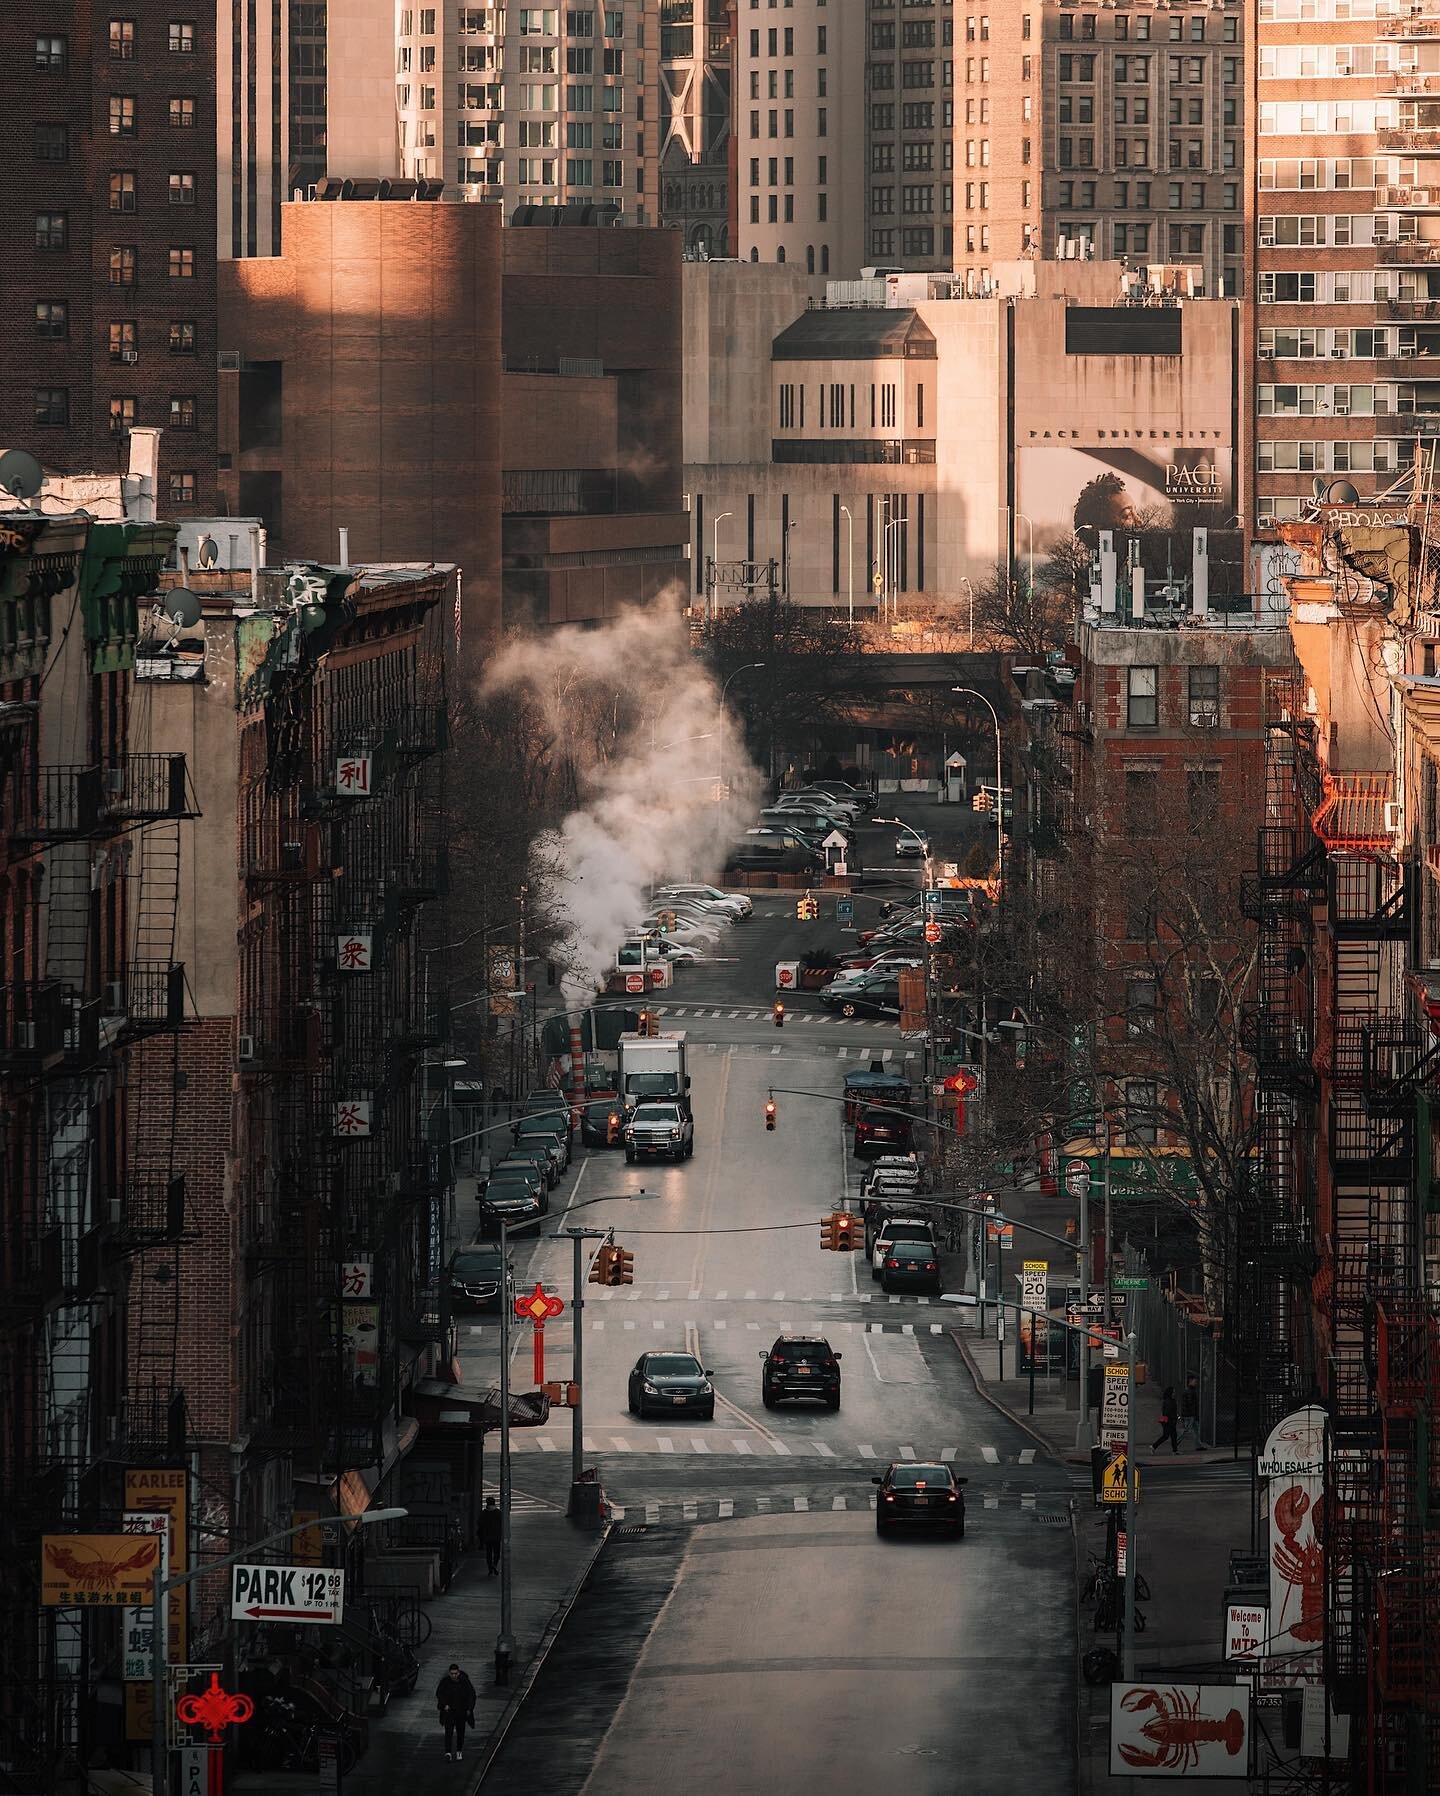 Happy to announce that I&rsquo;m @streeteasy featured photographer for the month of March.
First stop in my #streeteasyfinds is Chinatown. One of my favorite neighborhoods to take photos. 
What&rsquo;s your favorite neighborhood in New York City?